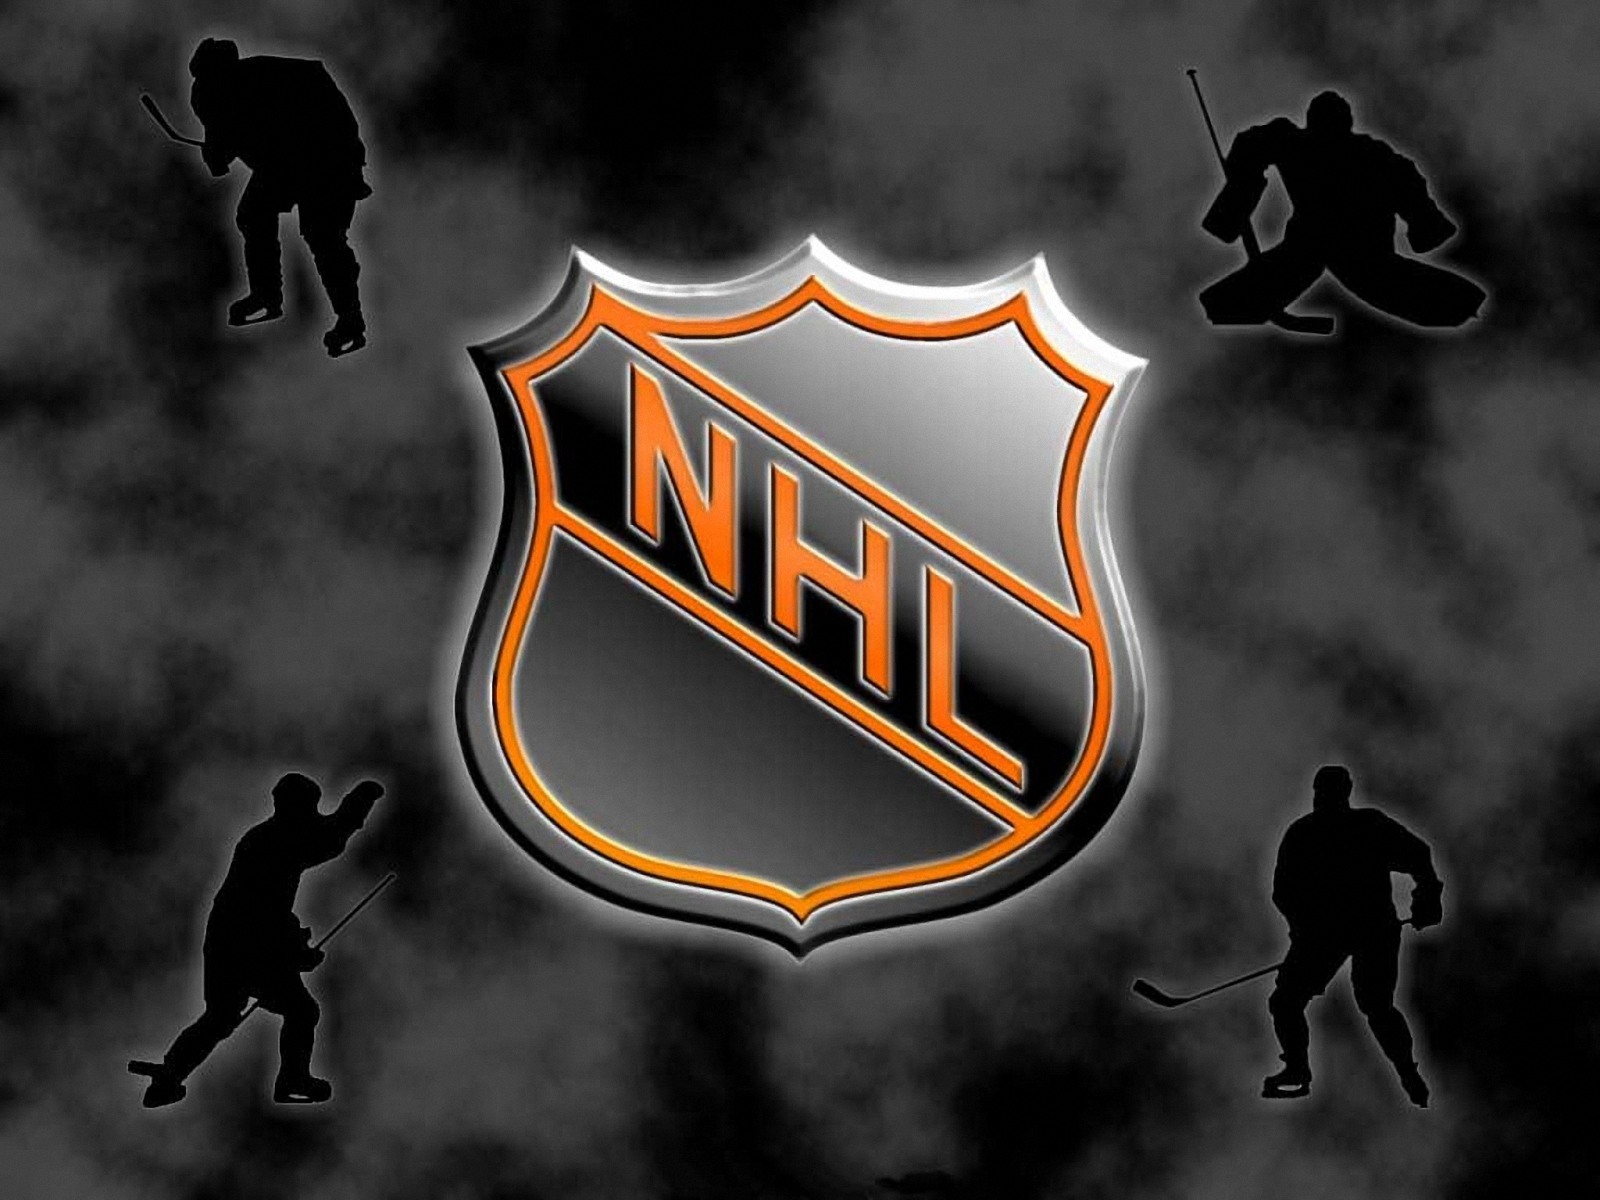 Ice Hockey NHL wallpaper 1600x1200 Wallpapers 1600x1200 Wallpapers 1600x1200